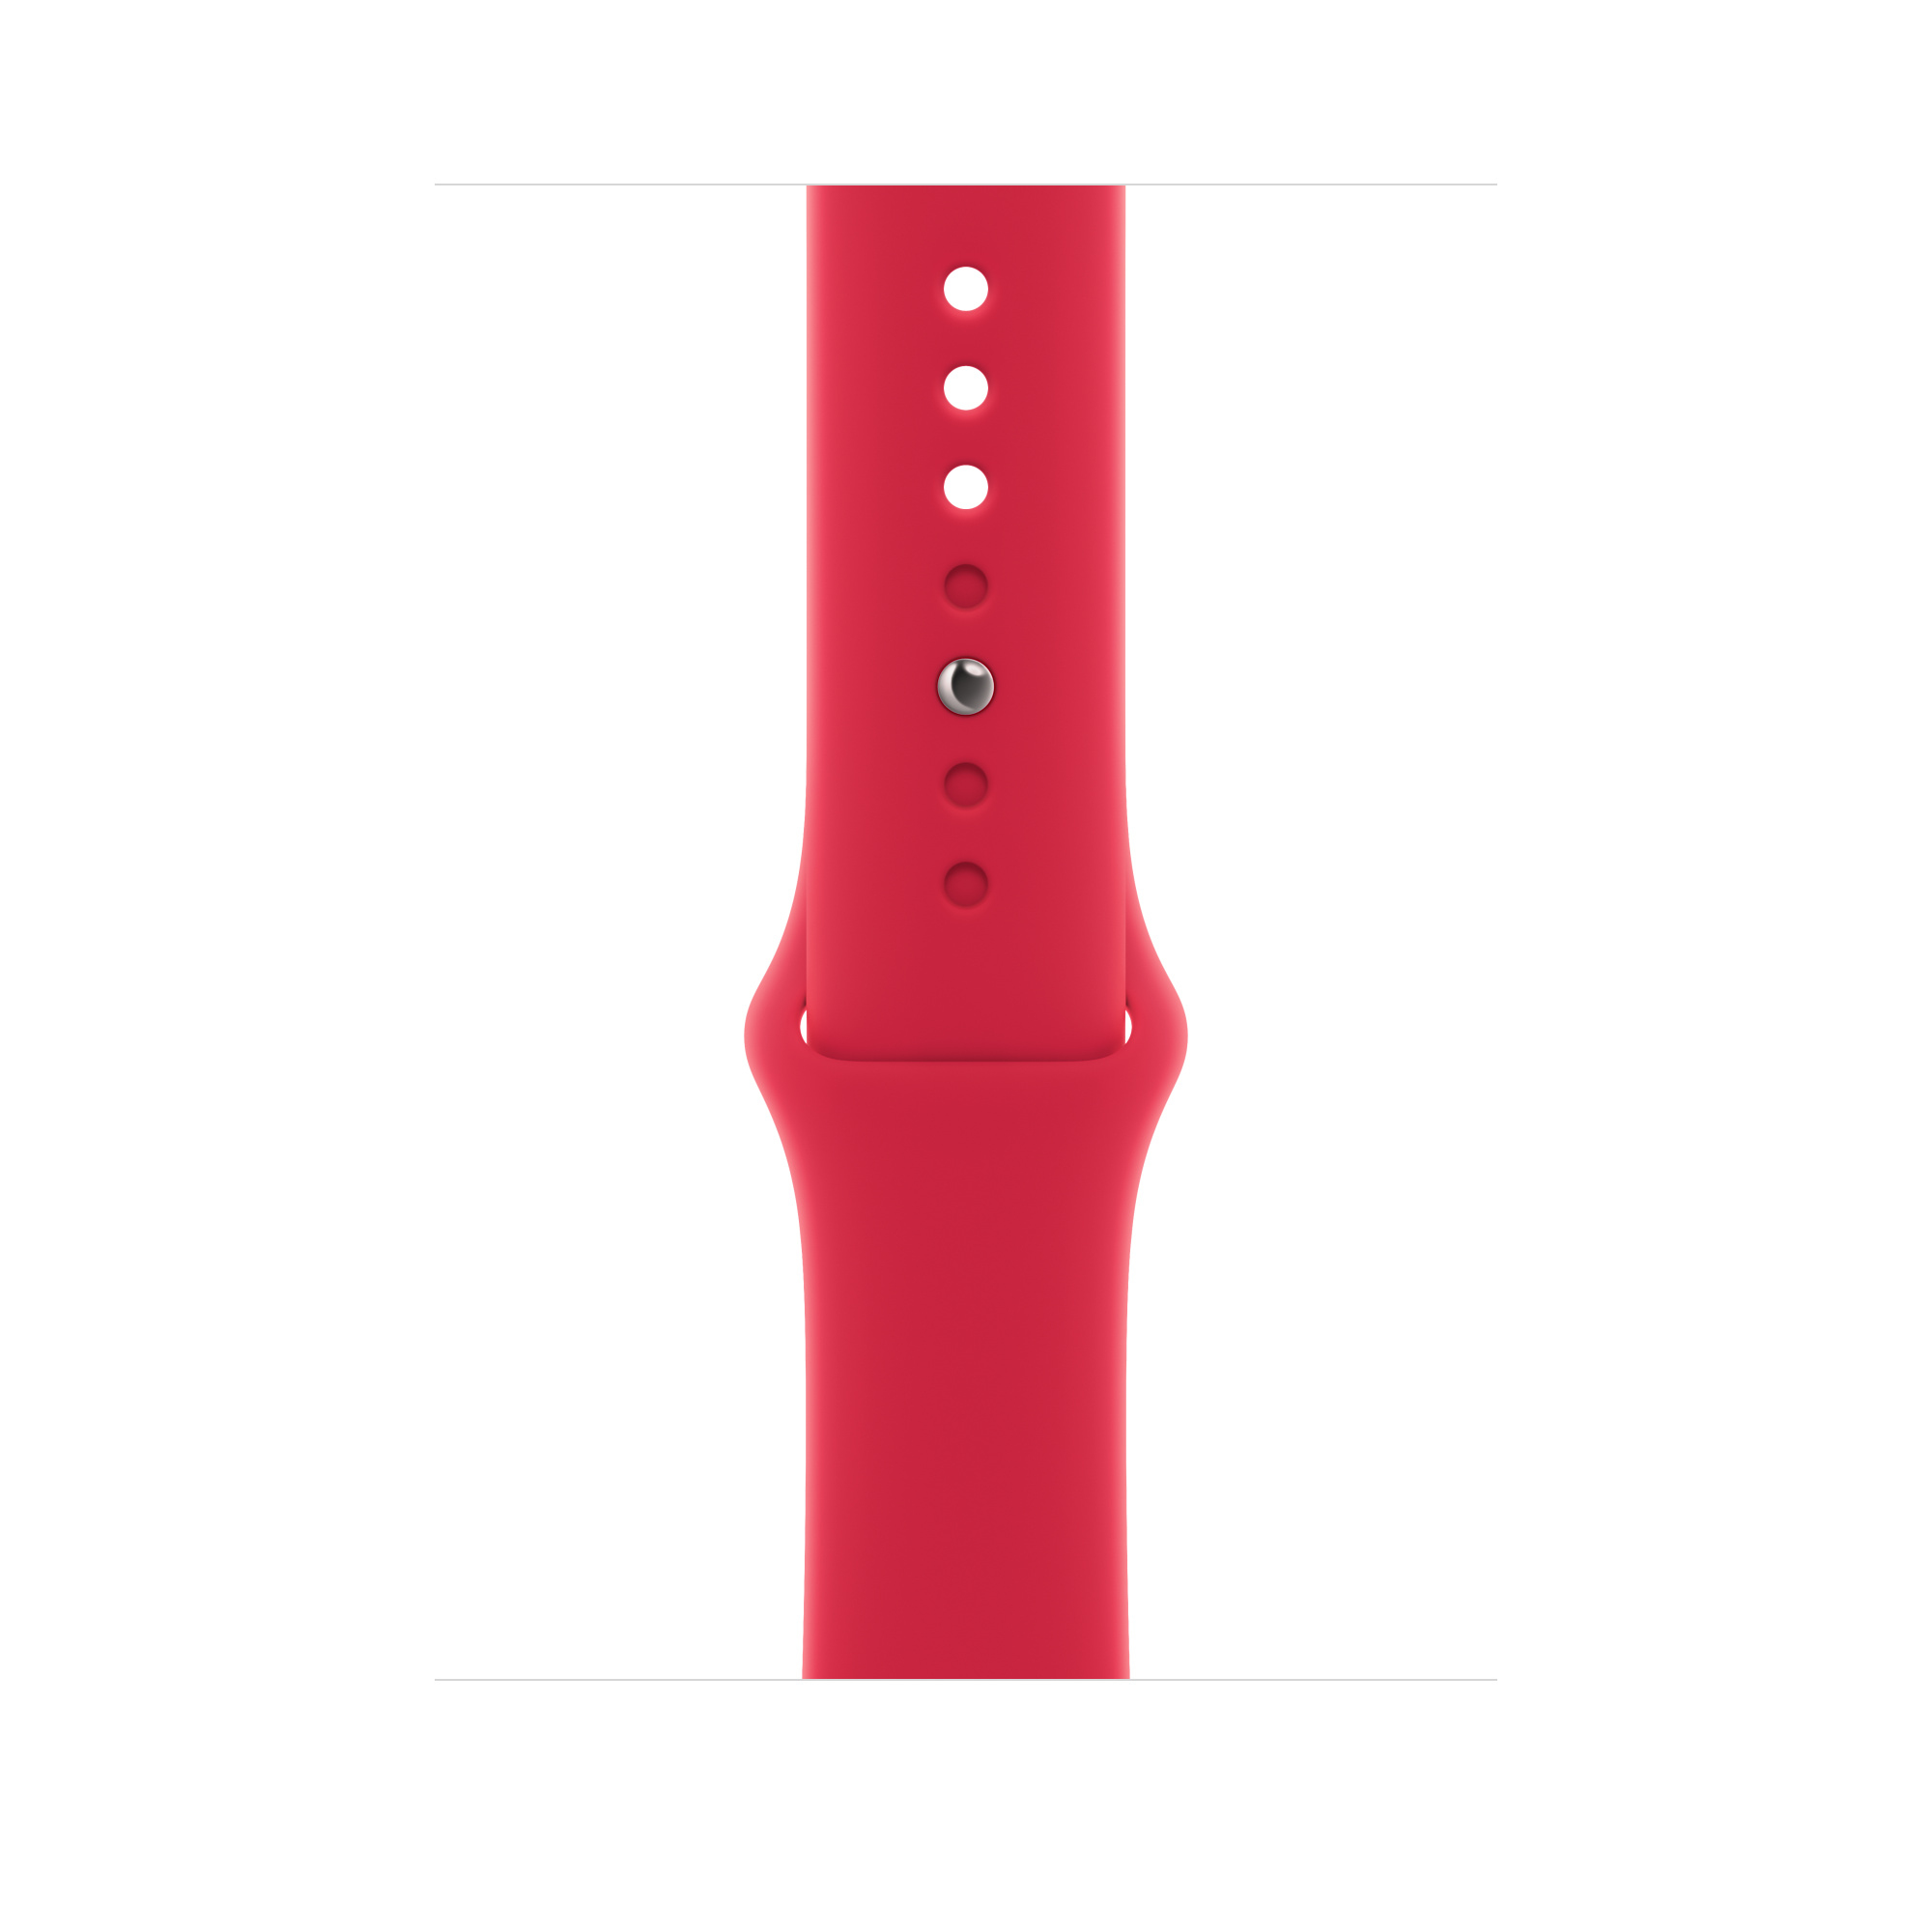 Apple 45mm Sport Band for Apple Watch - (Product)Red